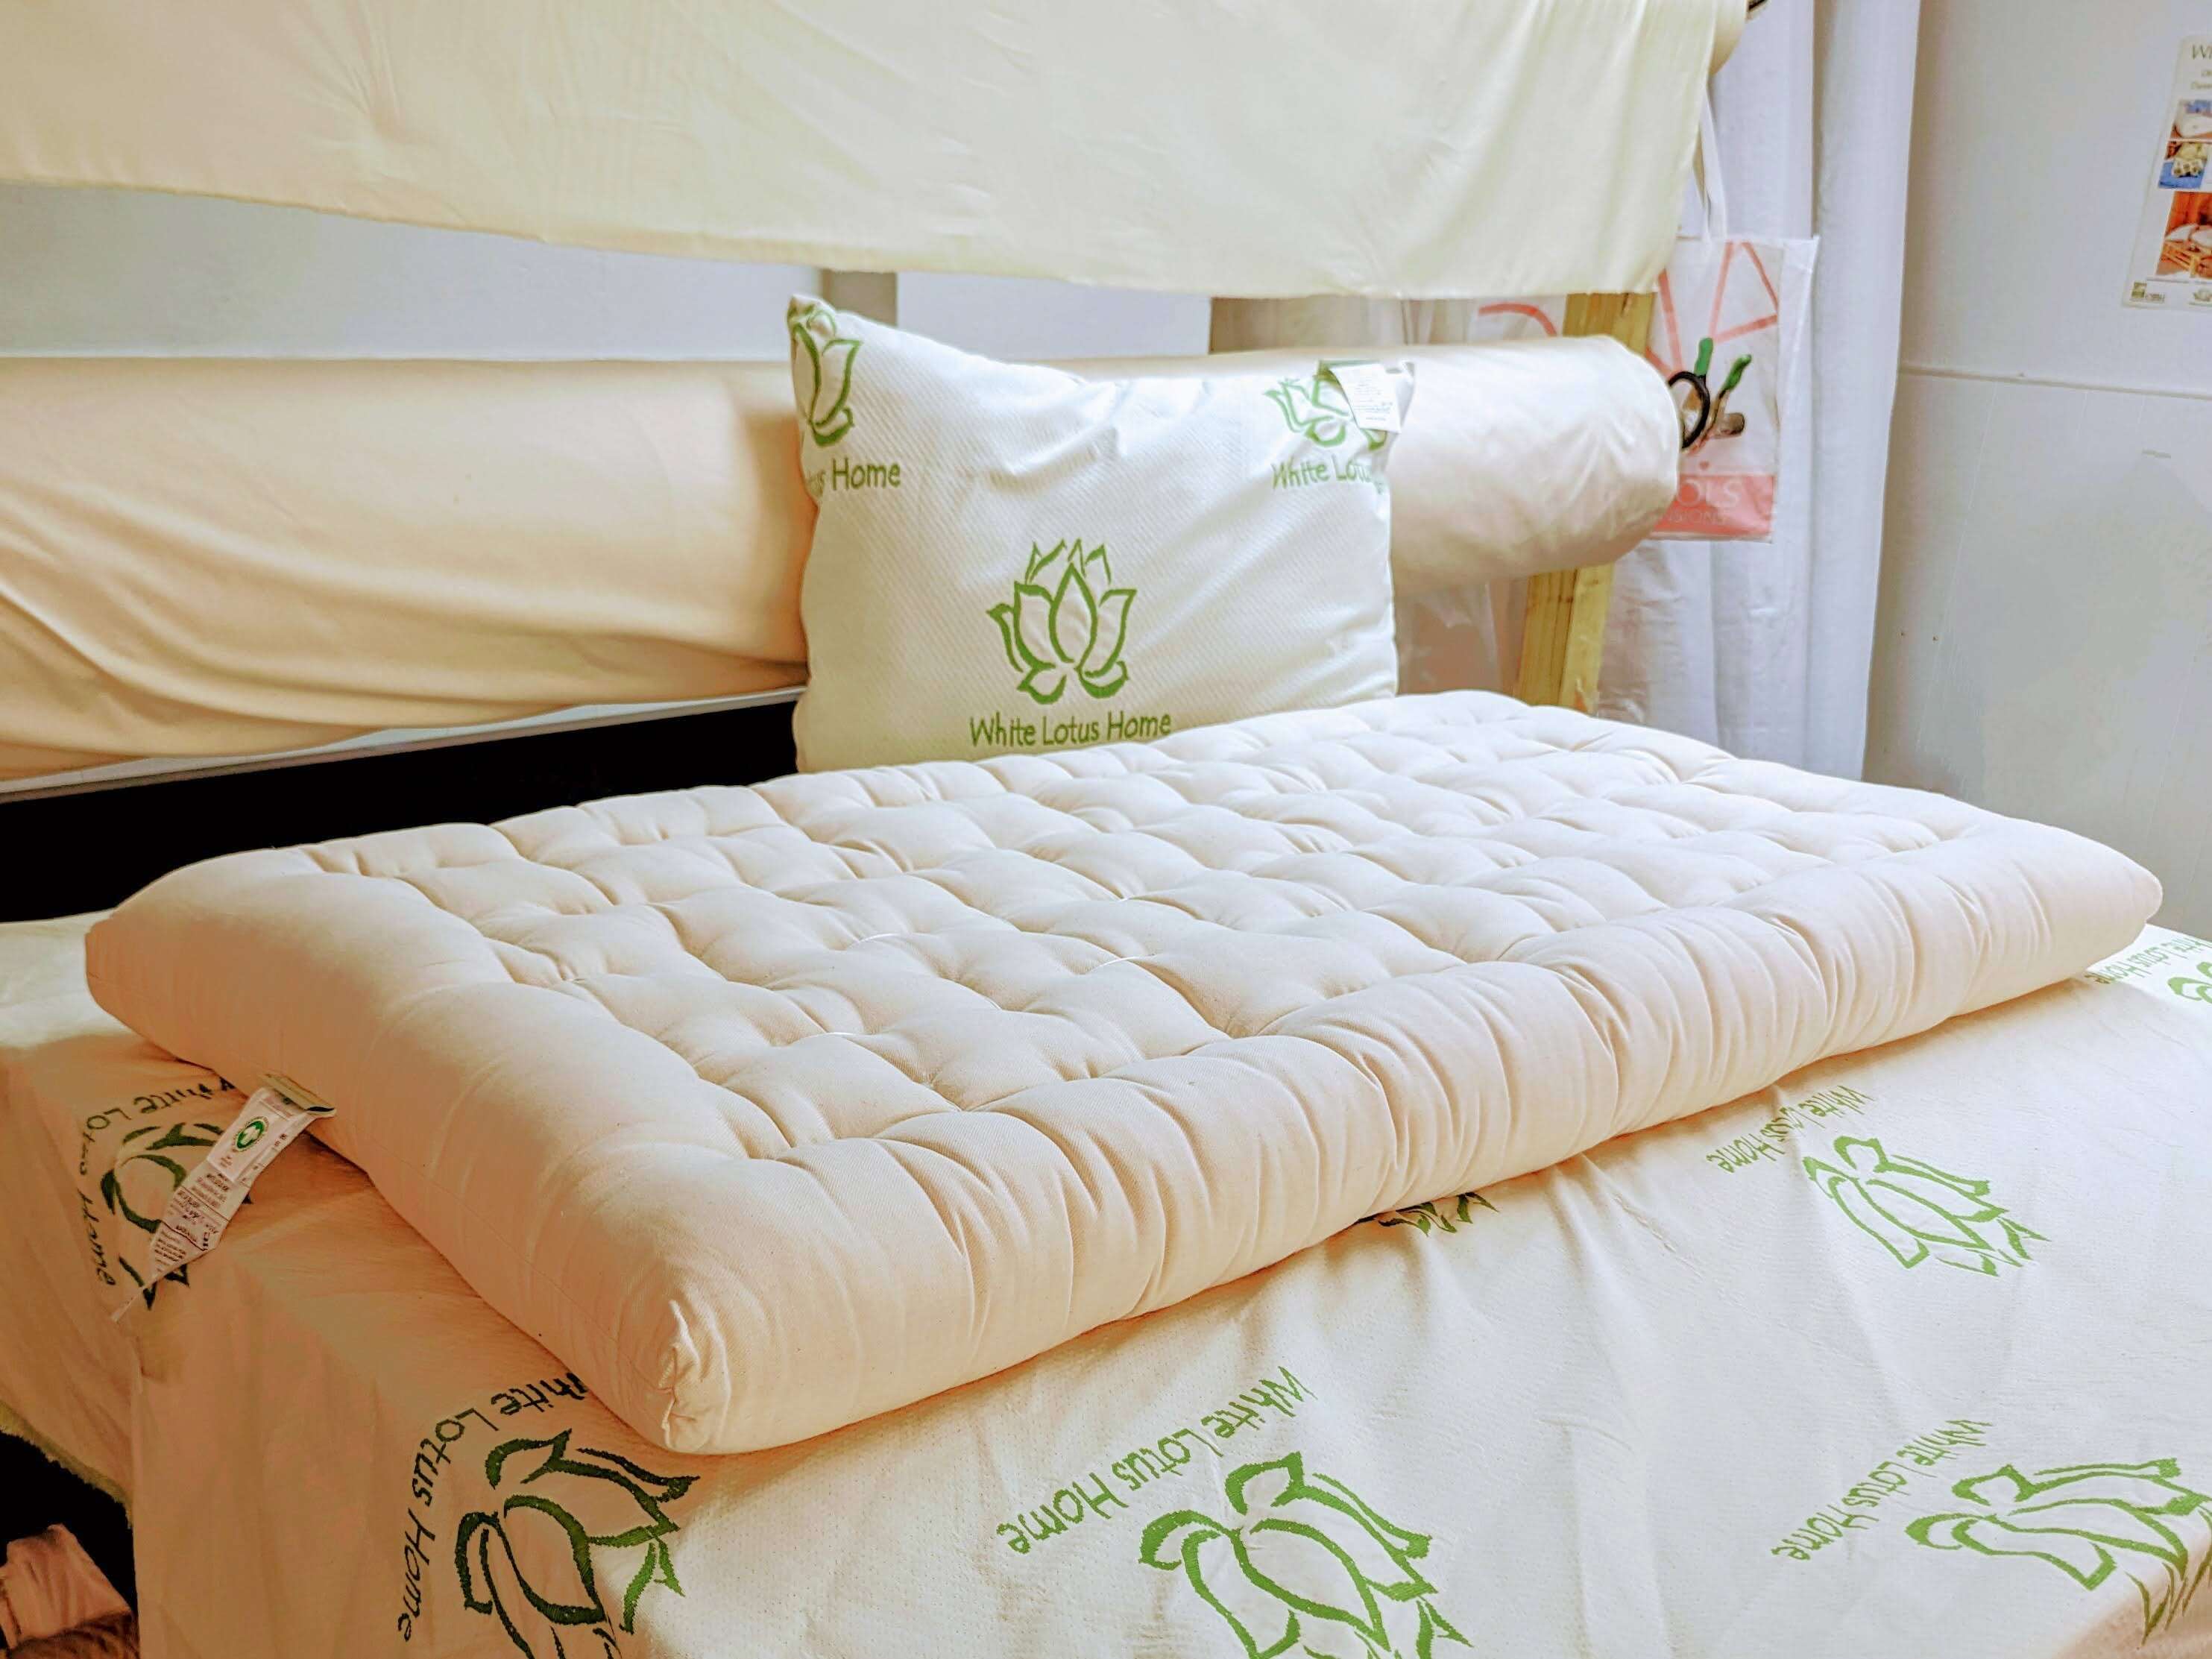 White Lotus Home: Natural & Organic Bedding & Home Furnishings, Handcrafted  in the USA